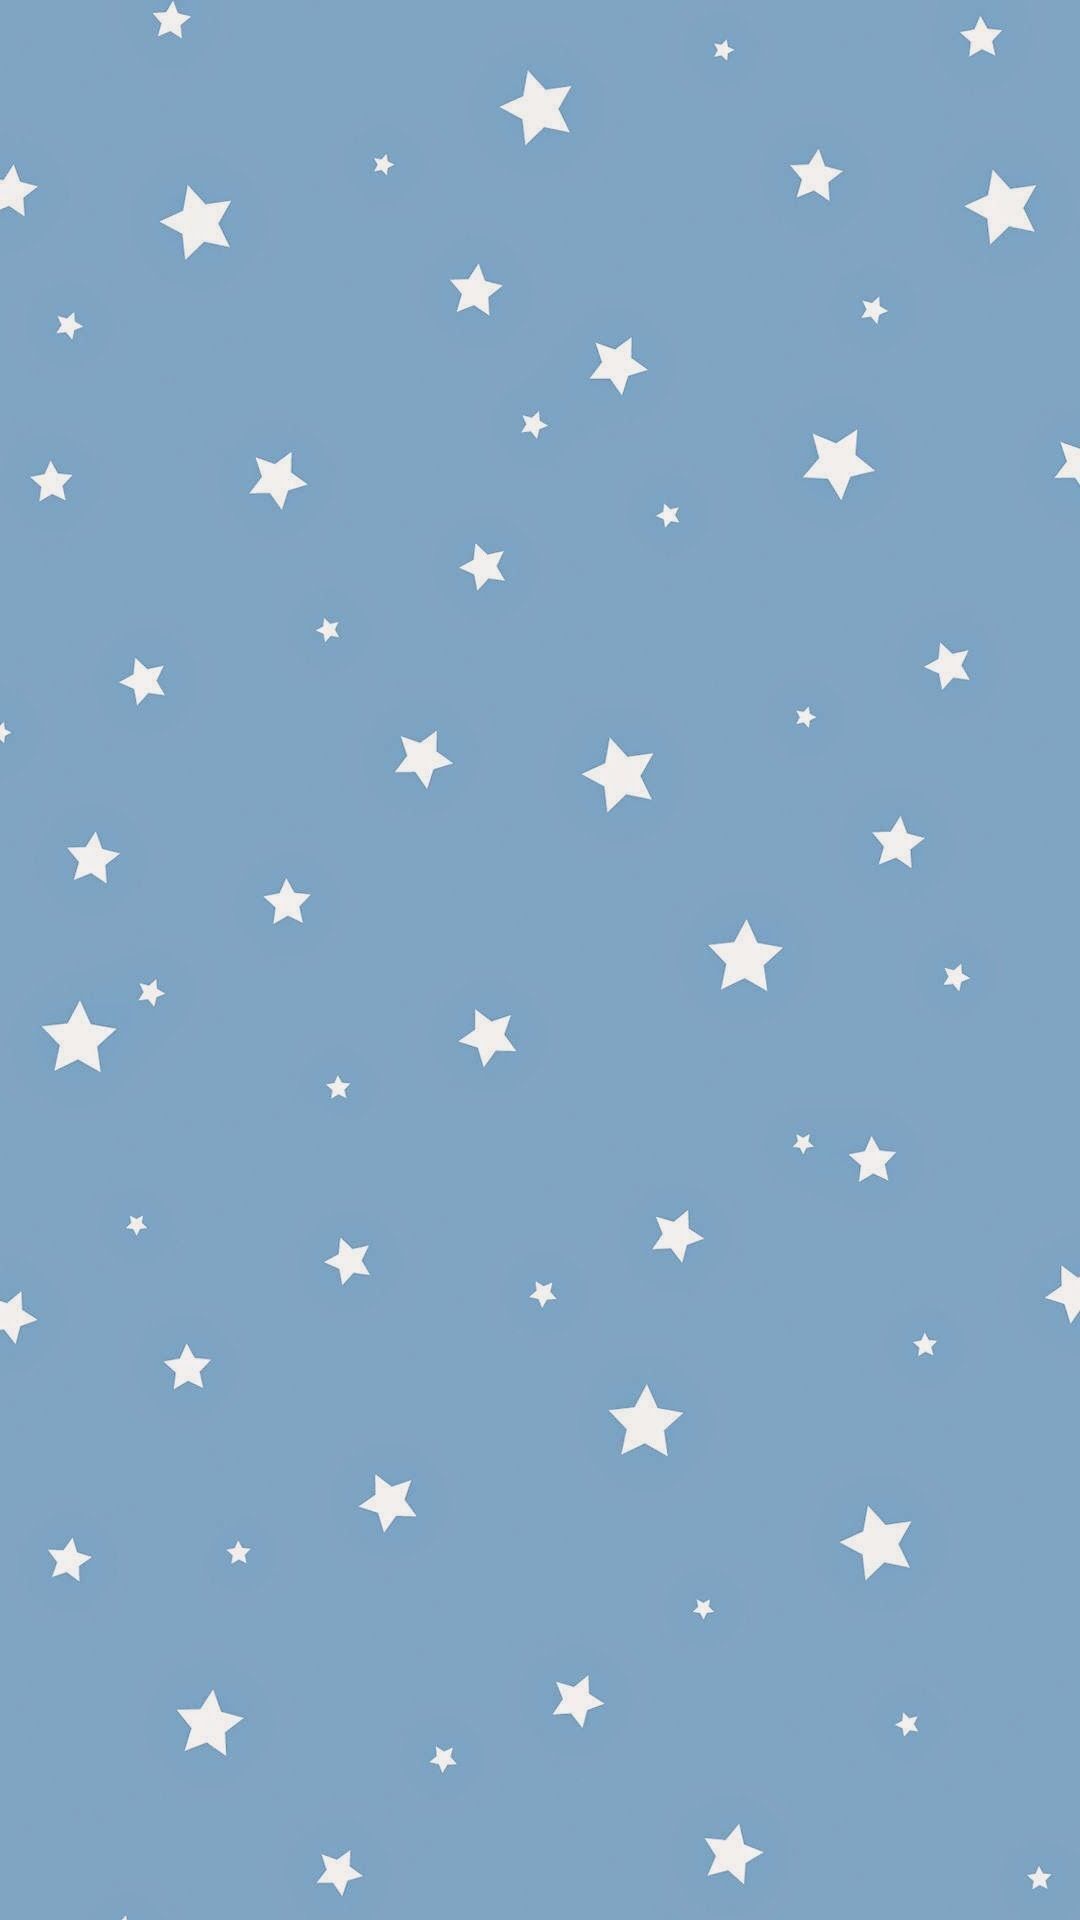 ✰ s t a r s ✰. Baby blue wallpaper, Blue aesthetic pastel, Baby blue aesthetic